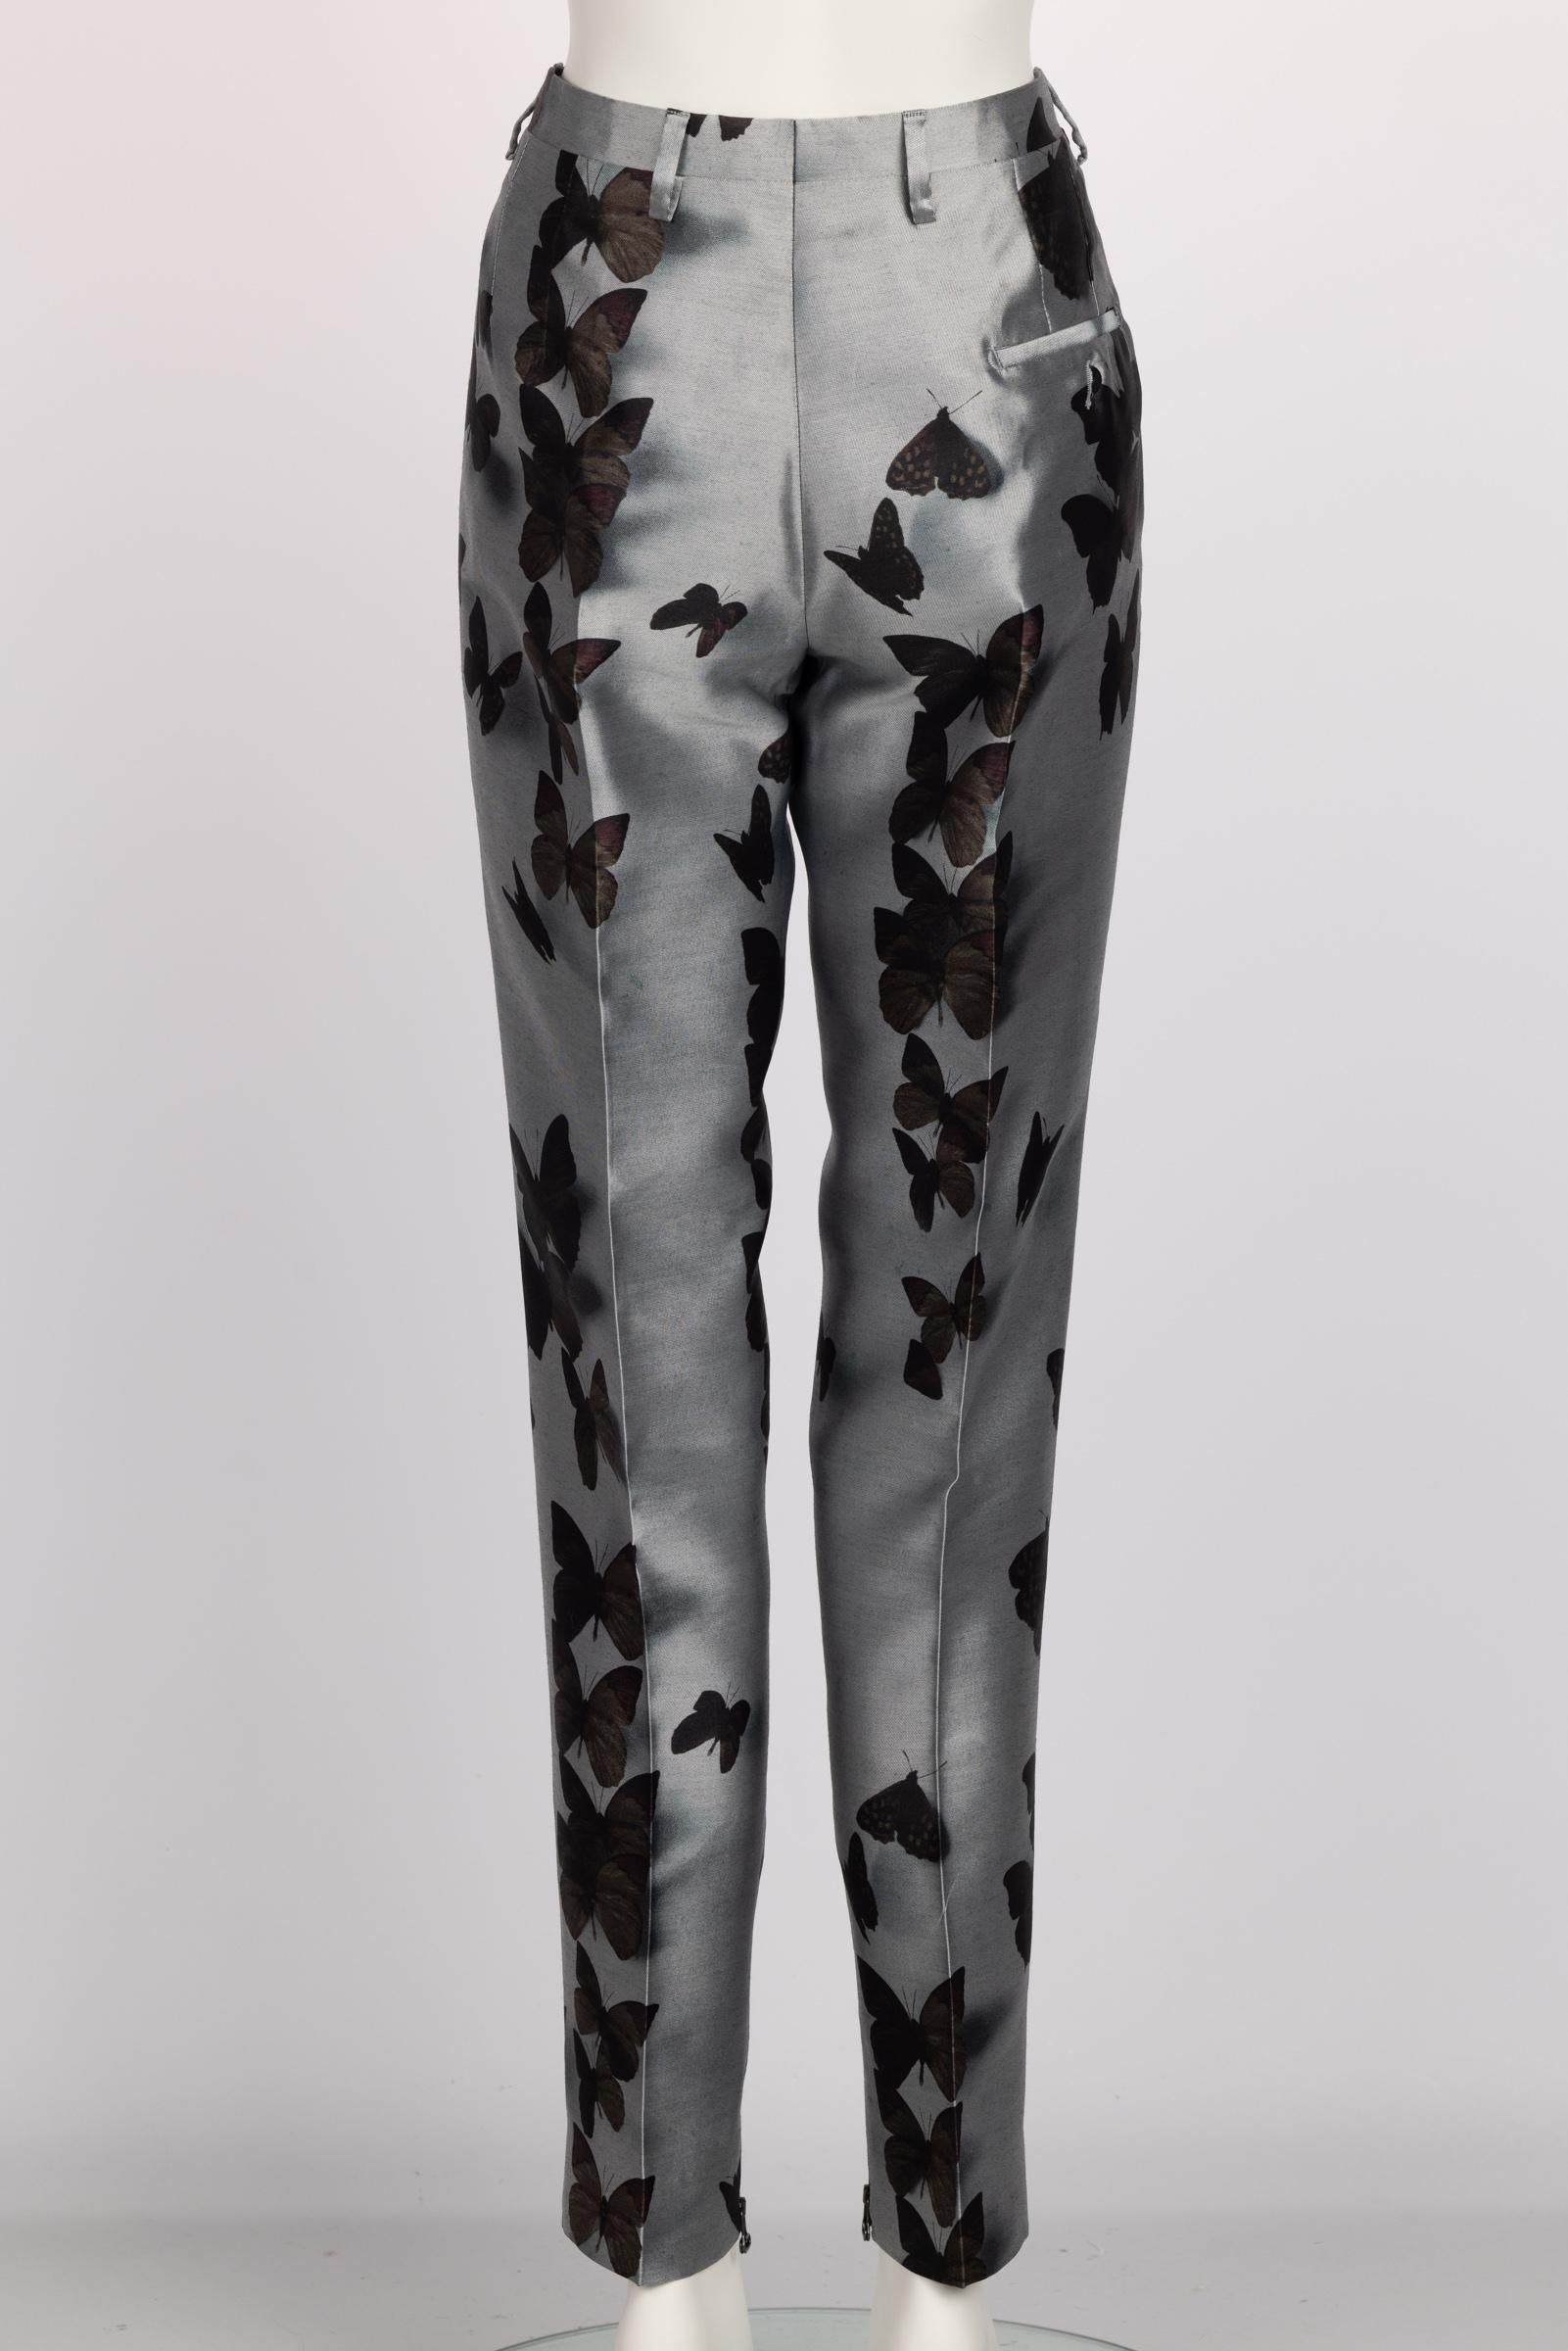 Lanvin Alber Elbaz Silk Butterfly Pants F/W 2013  In Excellent Condition For Sale In Boca Raton, FL